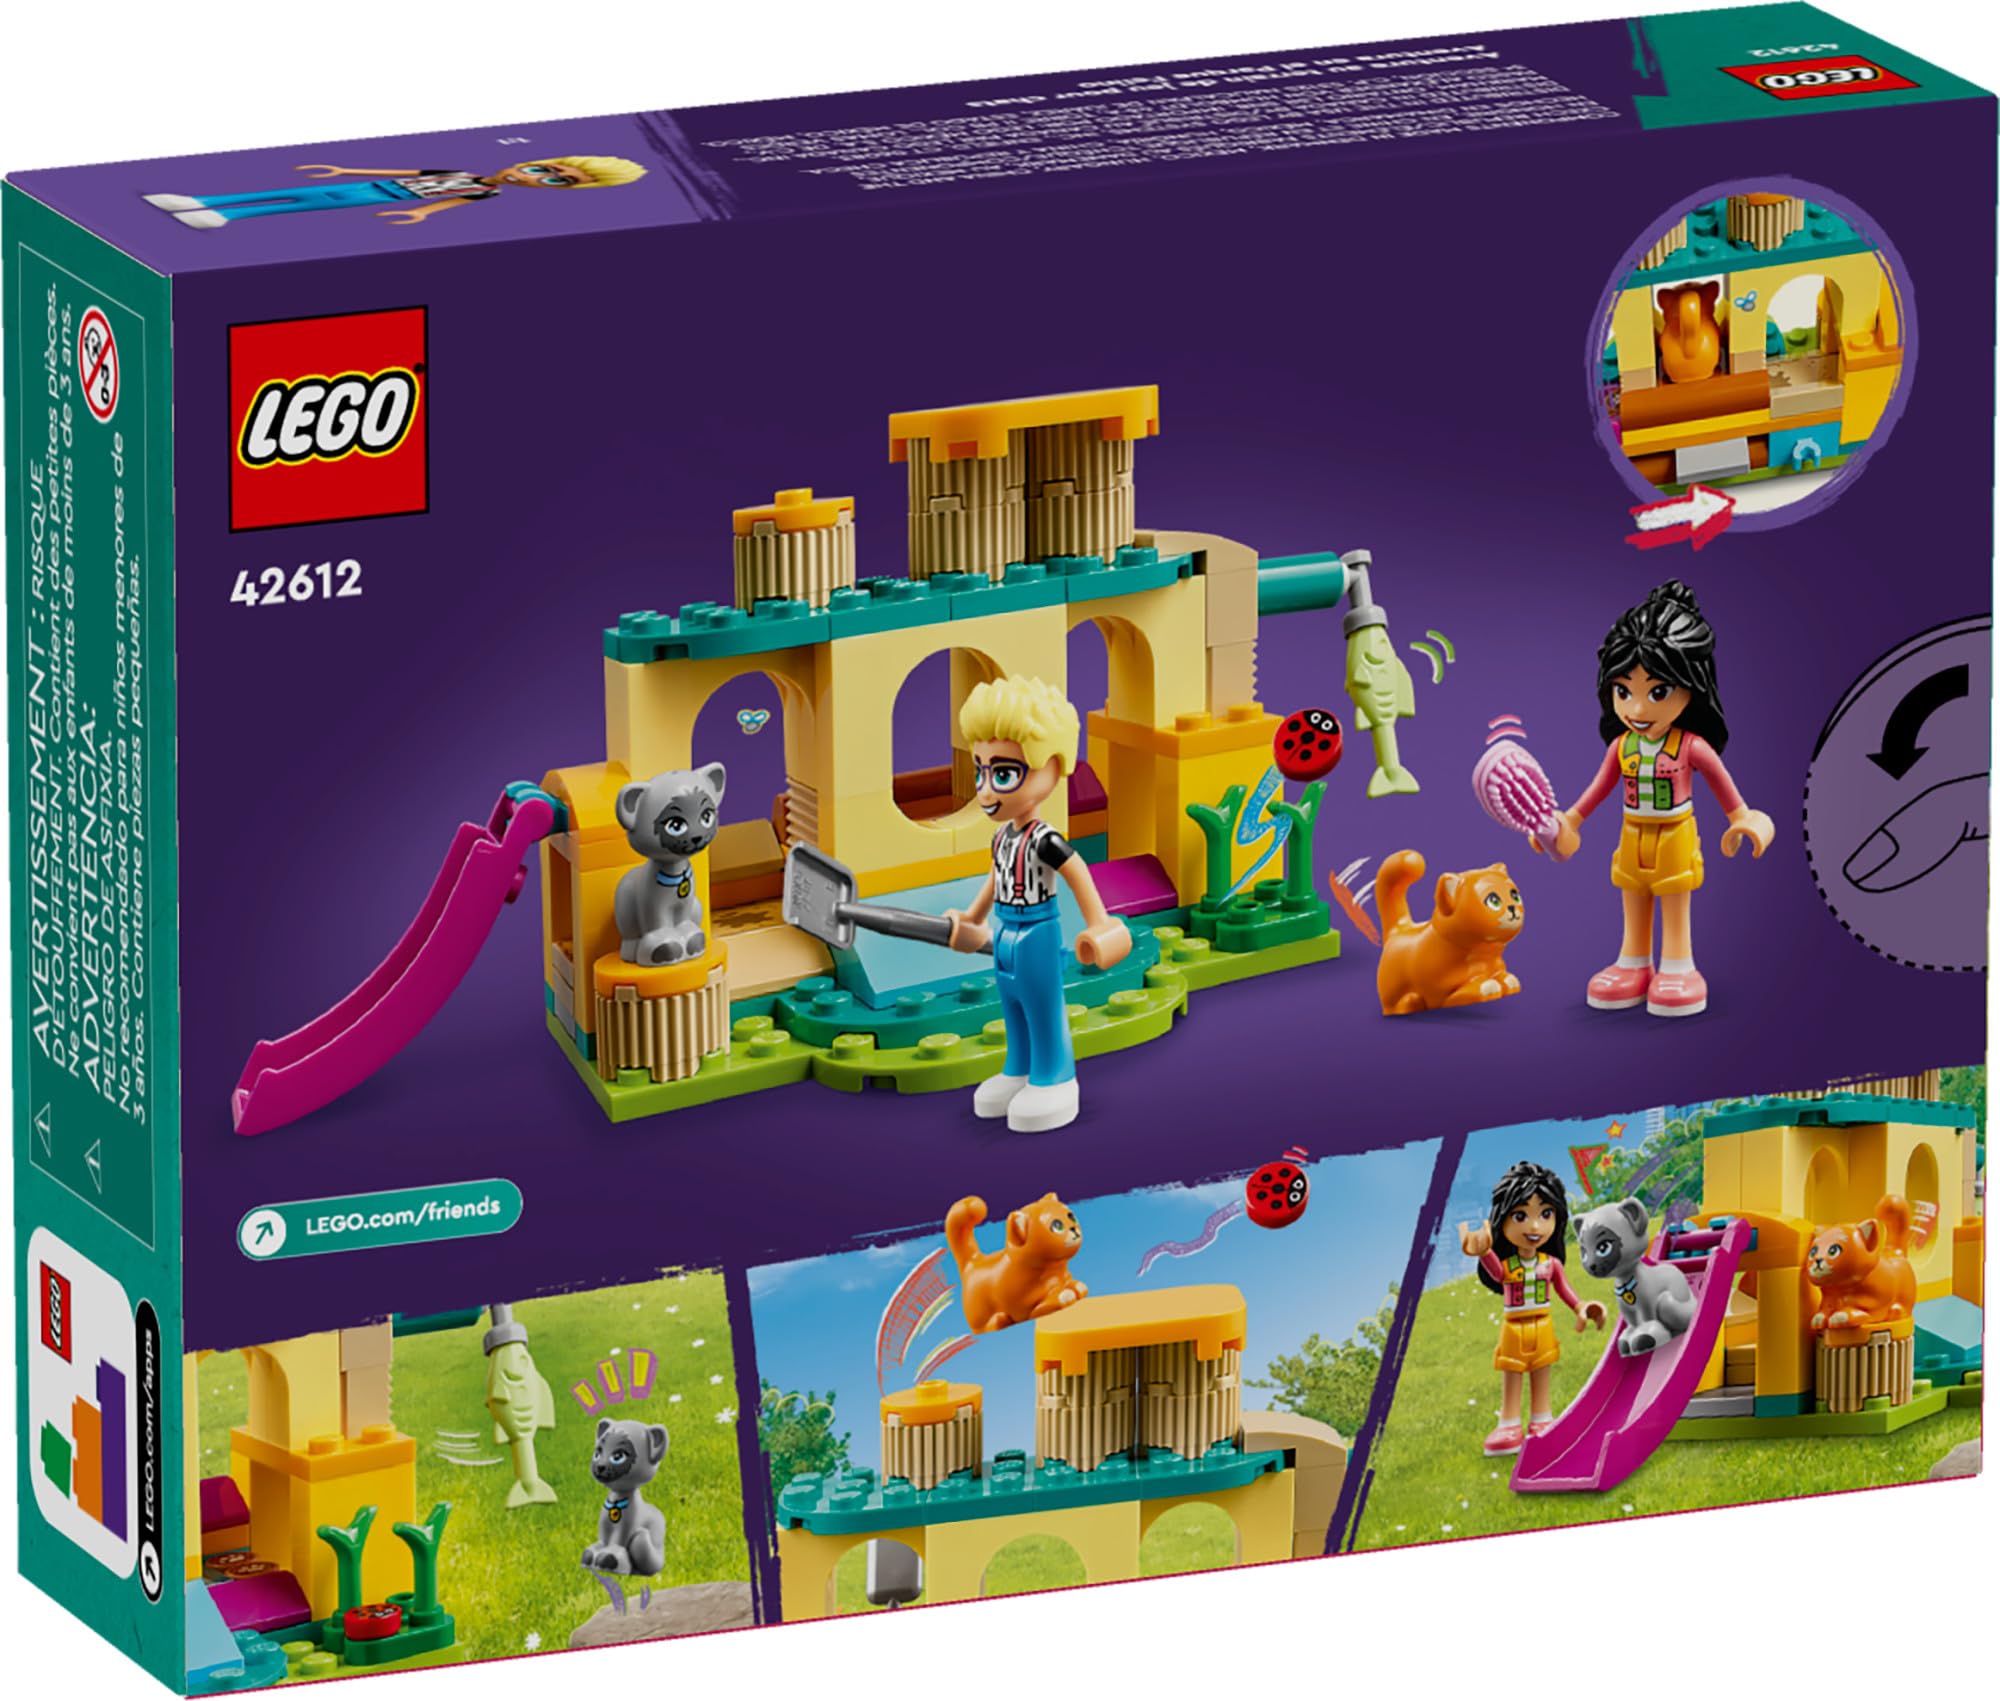 LEGO Friends Cat Playground Adventure, Animal Toy with Figures, Gift Set Idea for Kids, Girls and Boys 5 Years and Up, Pretend Play with Mini-Doll Characters Olly and Liann, 42612